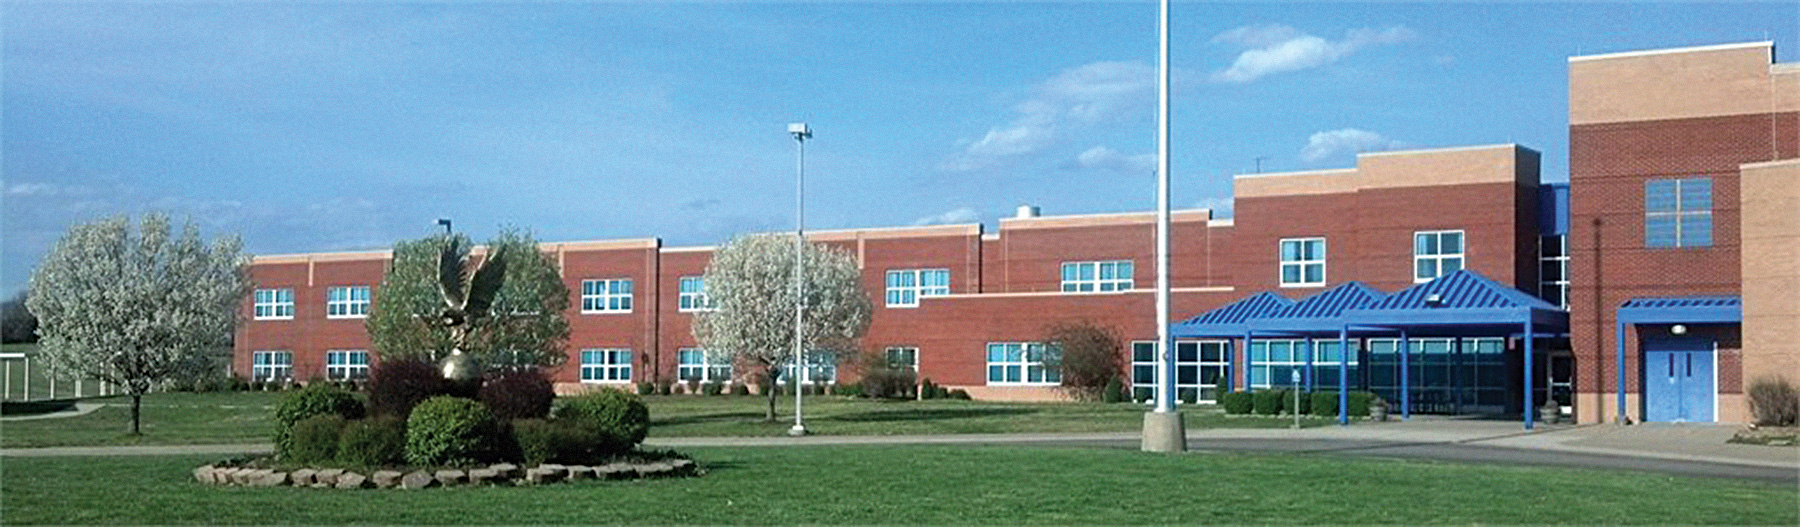 Lincoln County Middle School